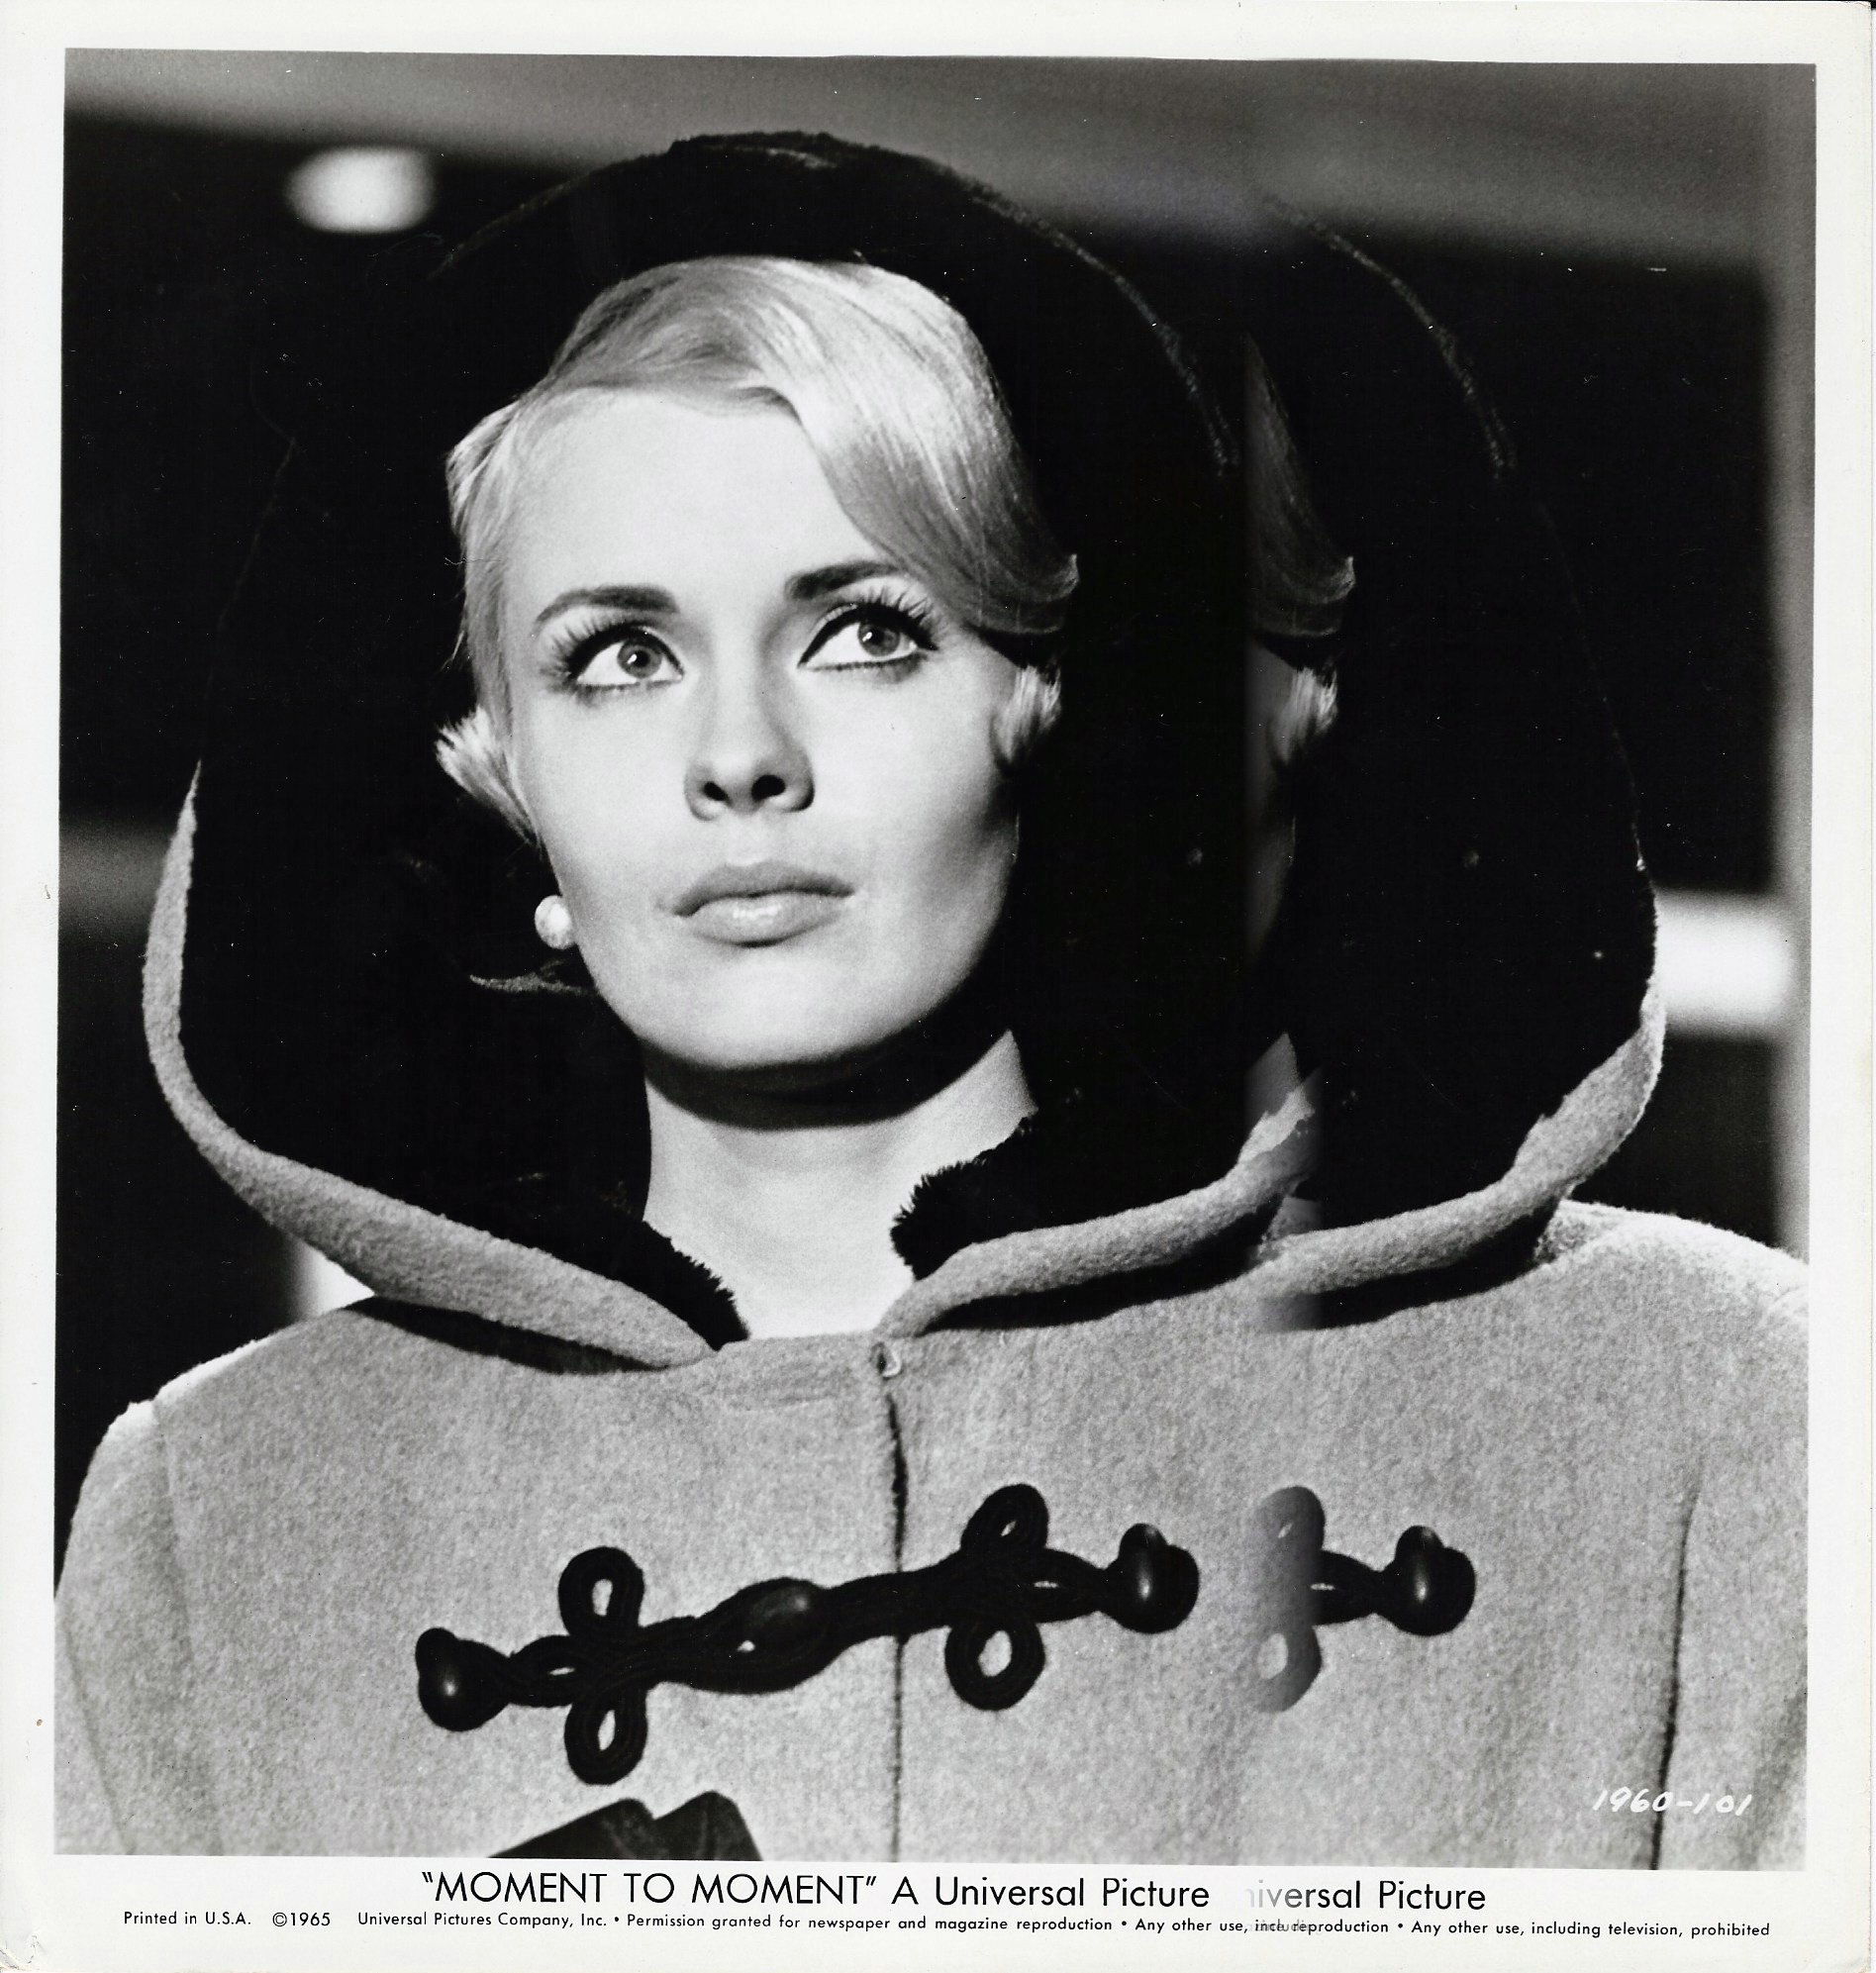 Jean Seberg Moment To Moment 1965 By Universal Photograph Walter Reuben Inc Abaa Ilab